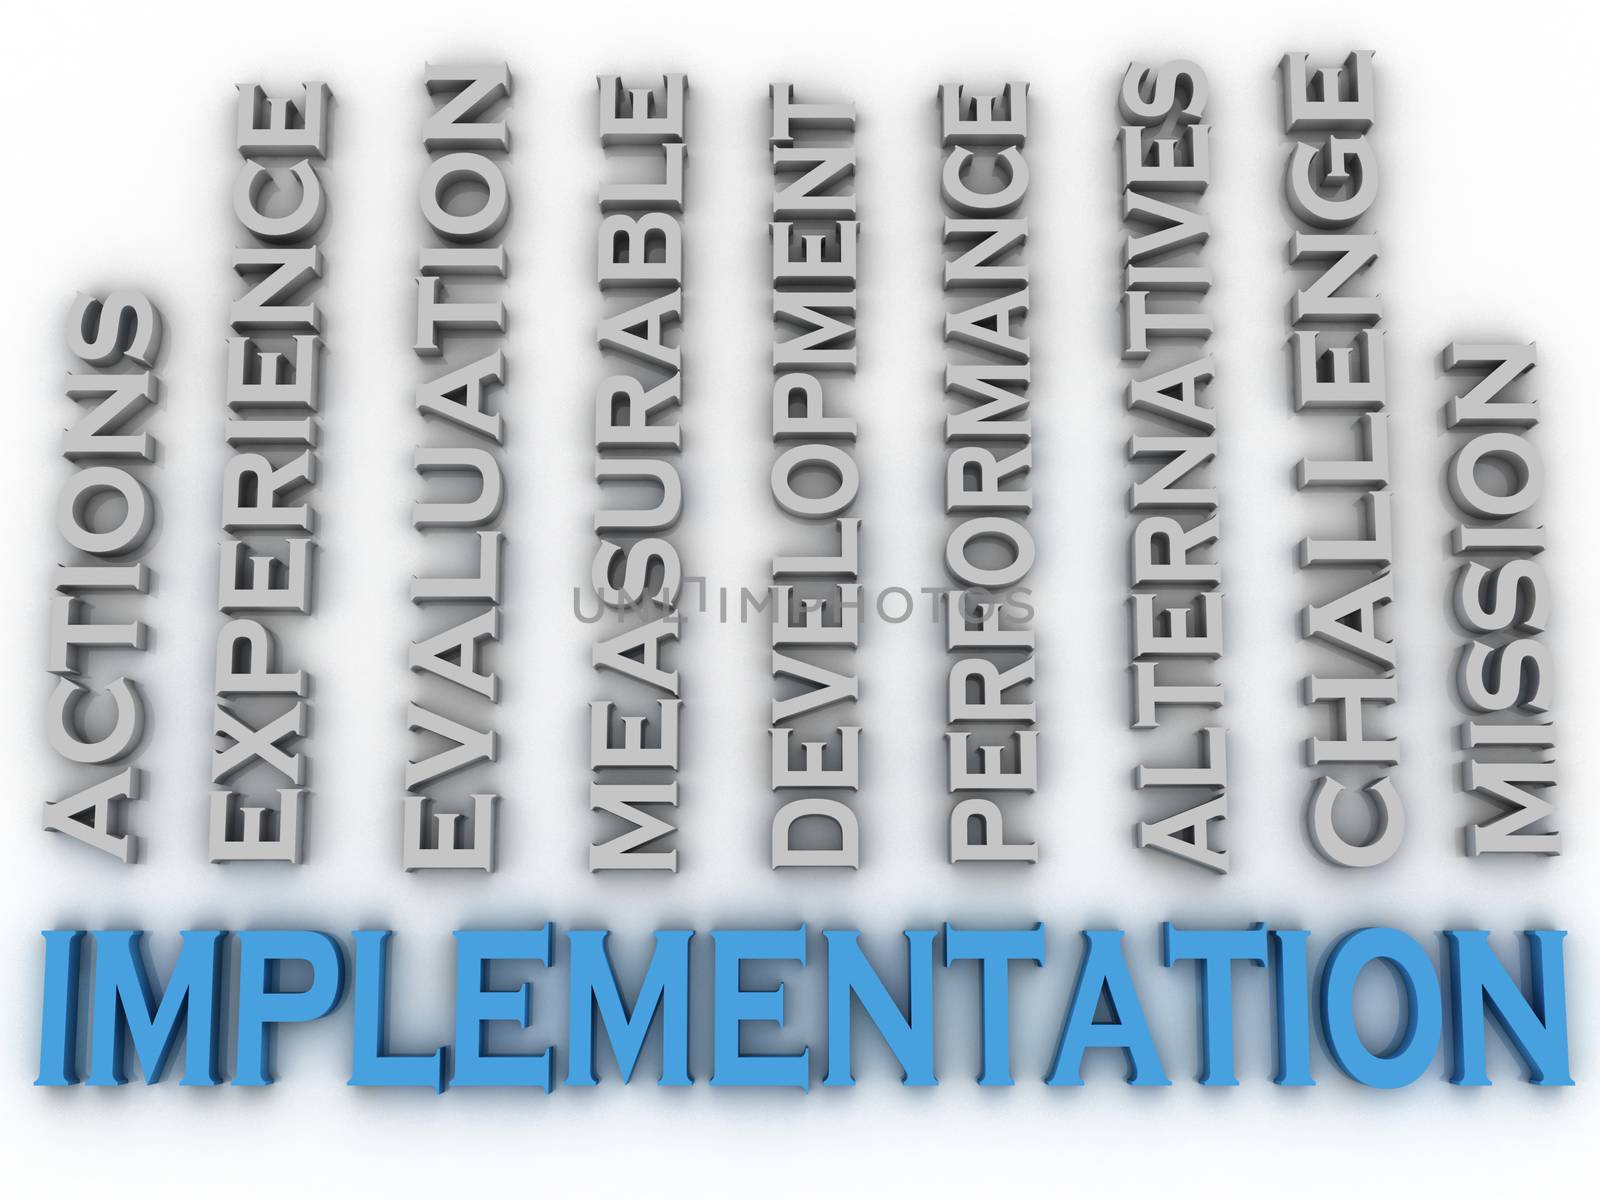 3d image Implementation issues concept word cloud background by dacasdo